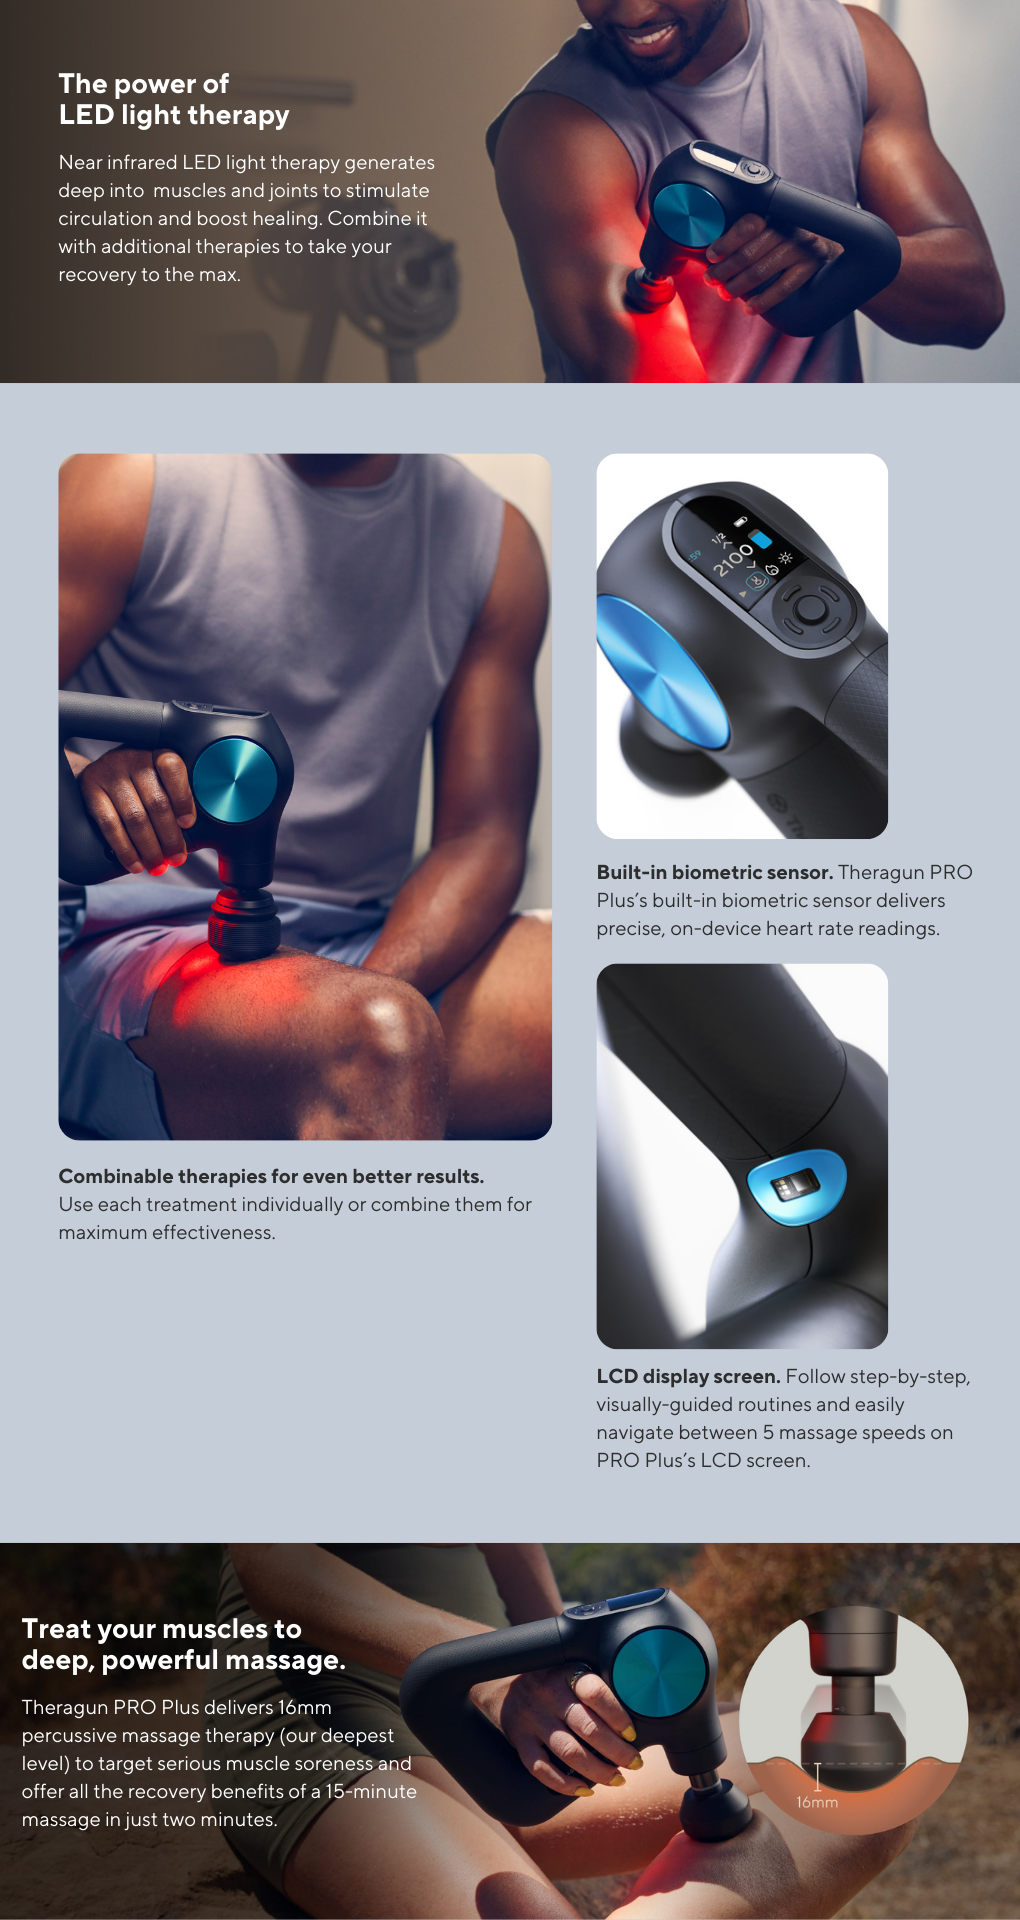 Theragun PRO Plus - 6 in 1 massage therapy device